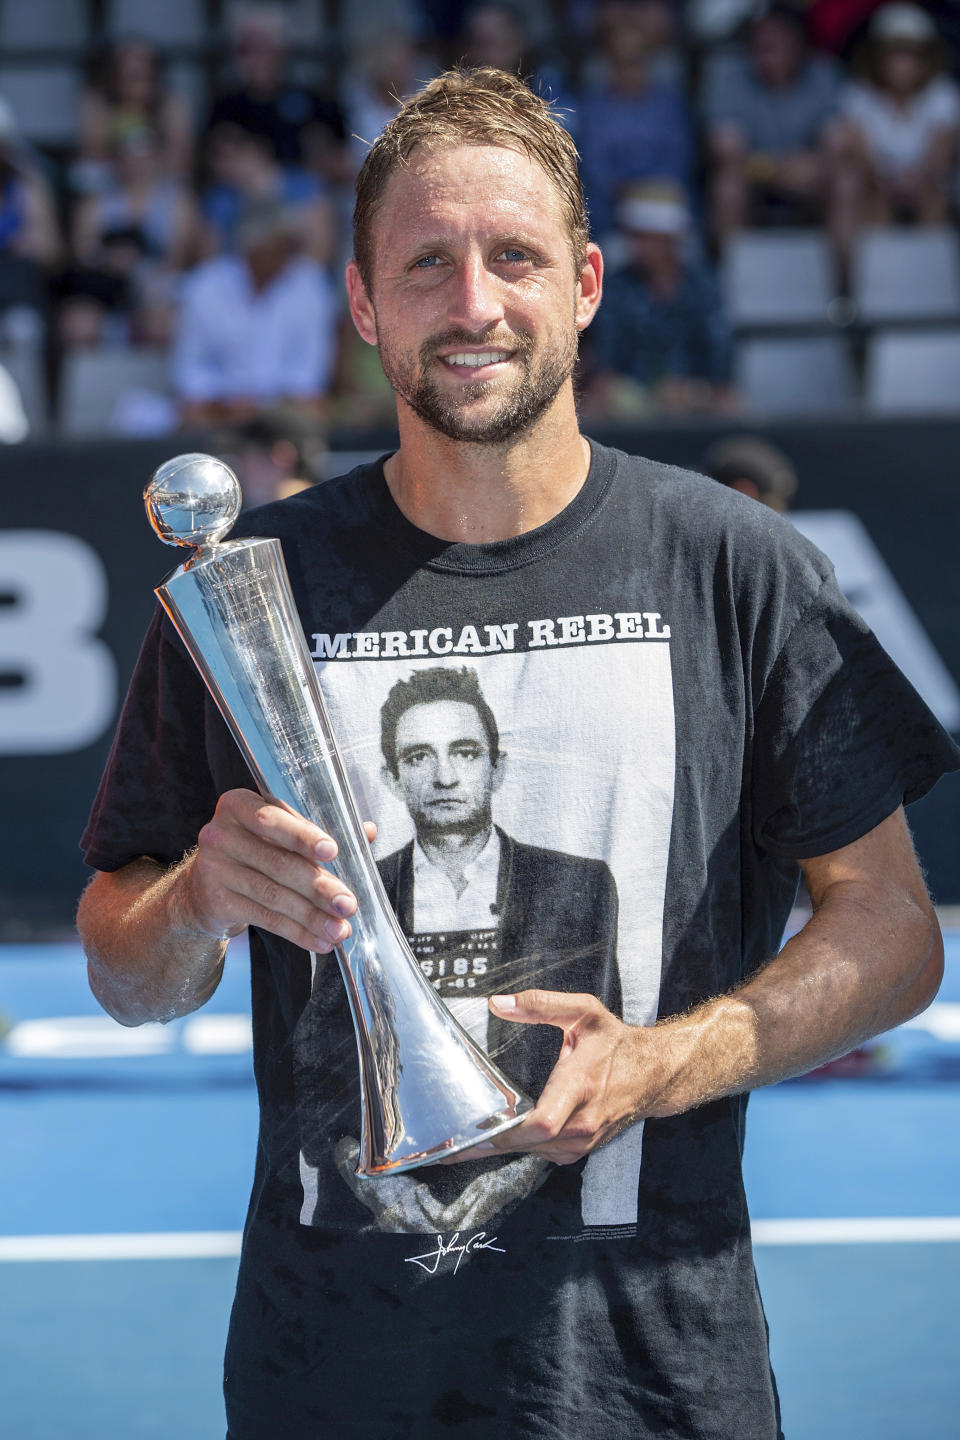 Tennys Sandgren of the U.S. celebrates with the trophy after defeating Britain's Cameron Norrie in their singles final match in the ASB Classic at ASB Tennis Arena in Auckland, New Zealand, Saturday, Jan. 12, 2019. (AP Photo/David Rowland)